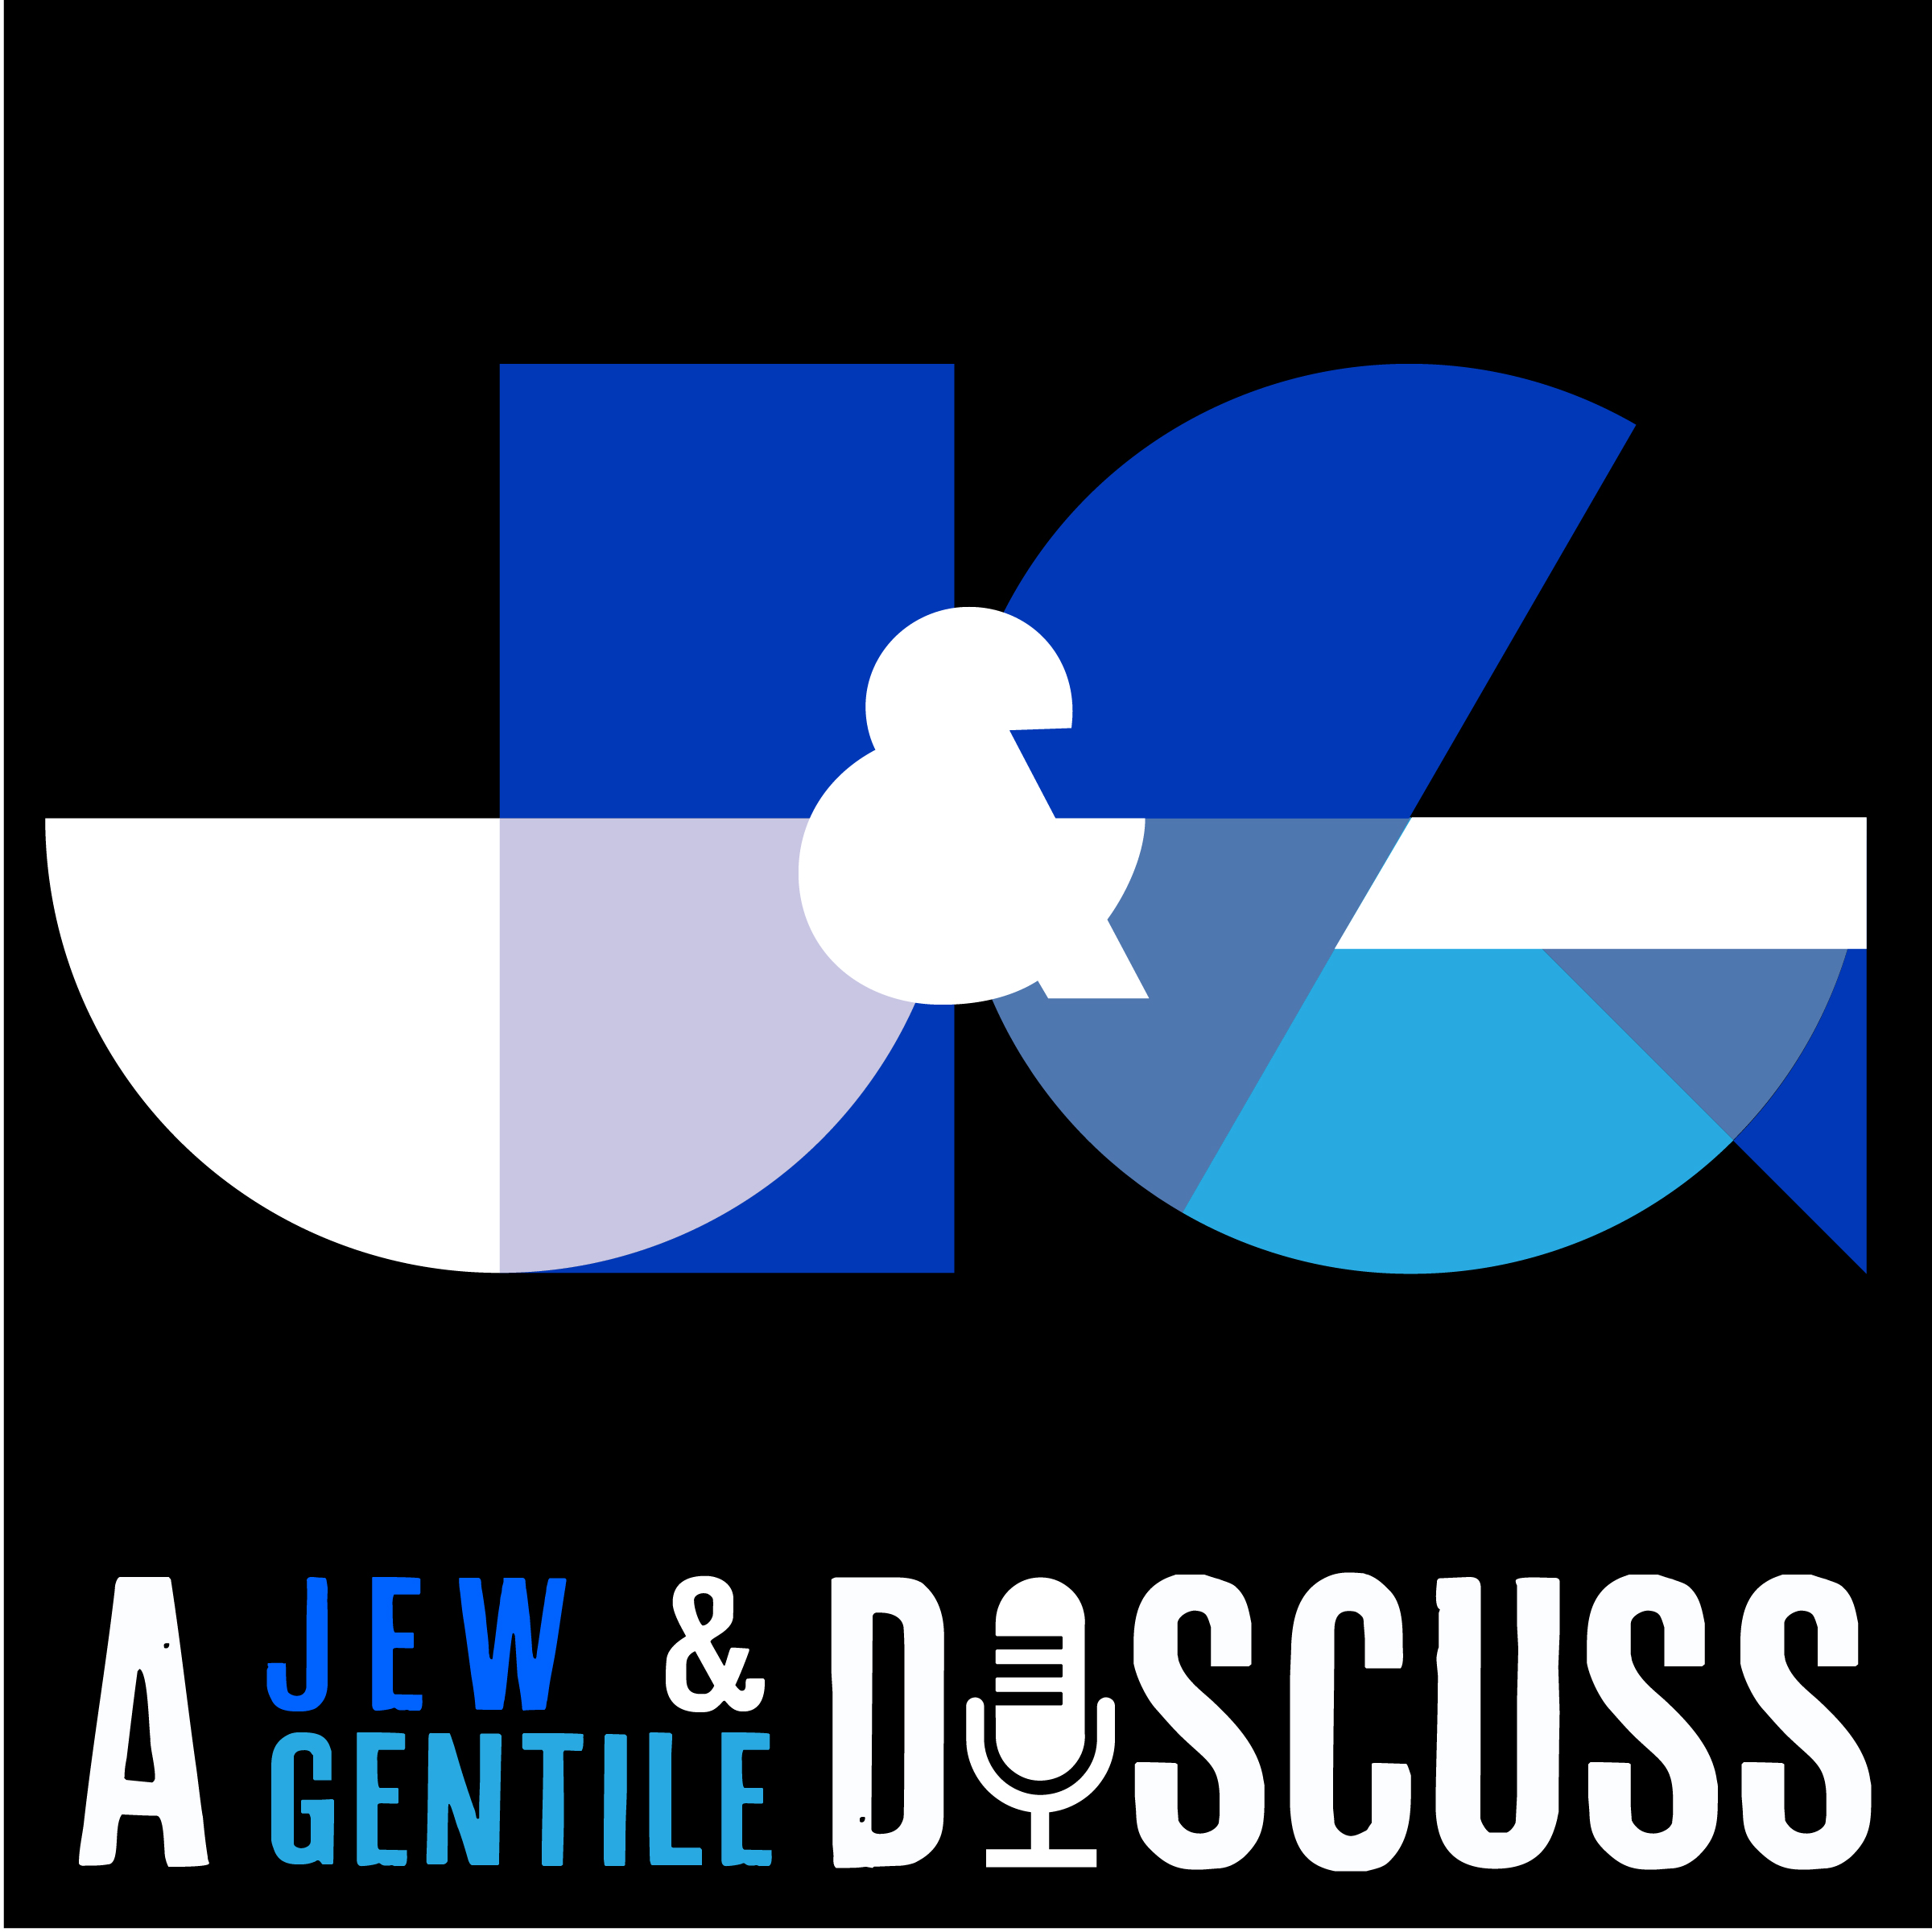 S4 EP1 | Is Messianic Judaism a Jewish or Christian Religion?